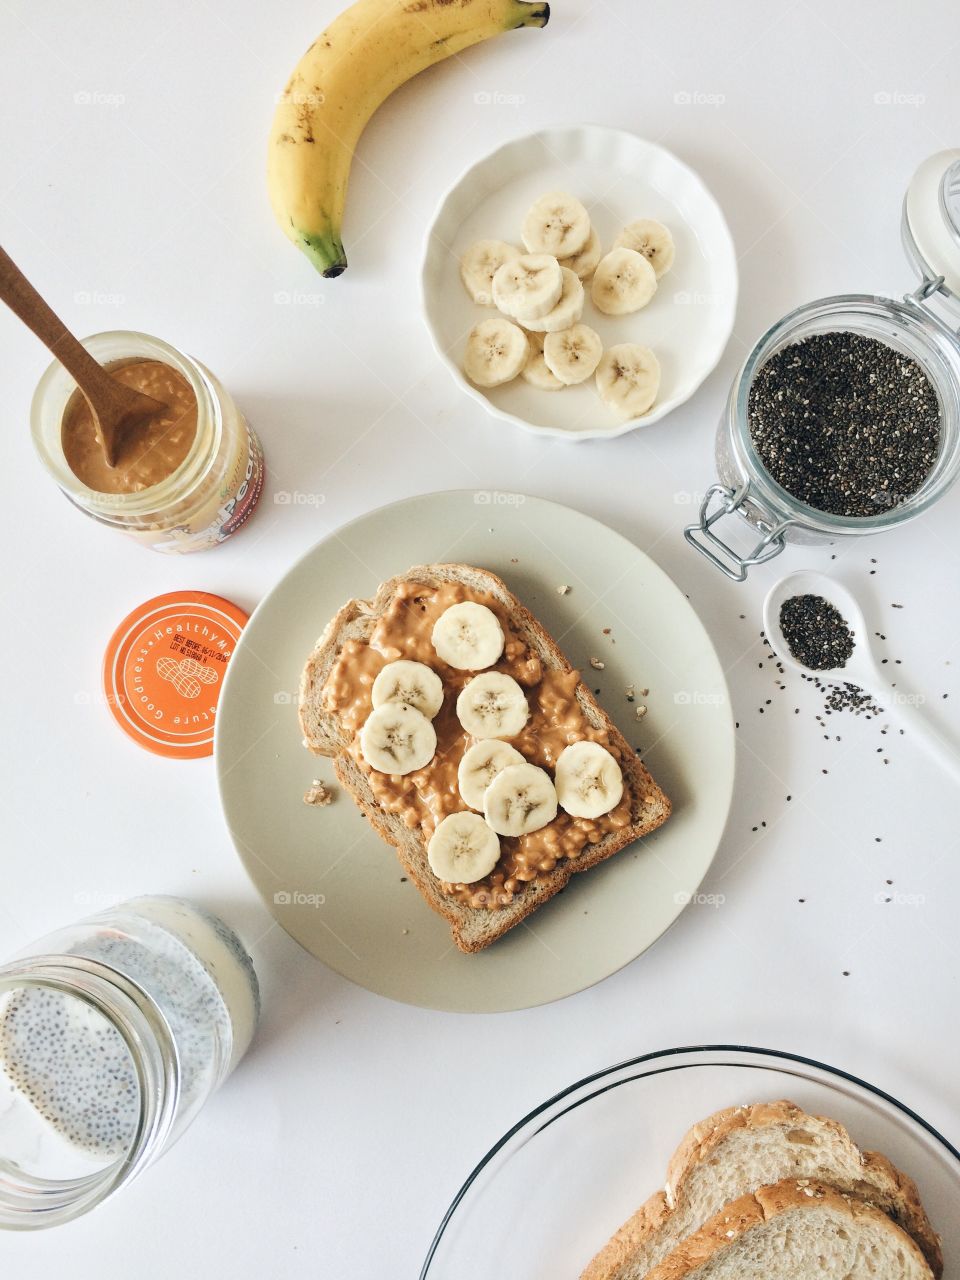 Warm up flat lays : Simply breakfast with banana and peanut butter toast.